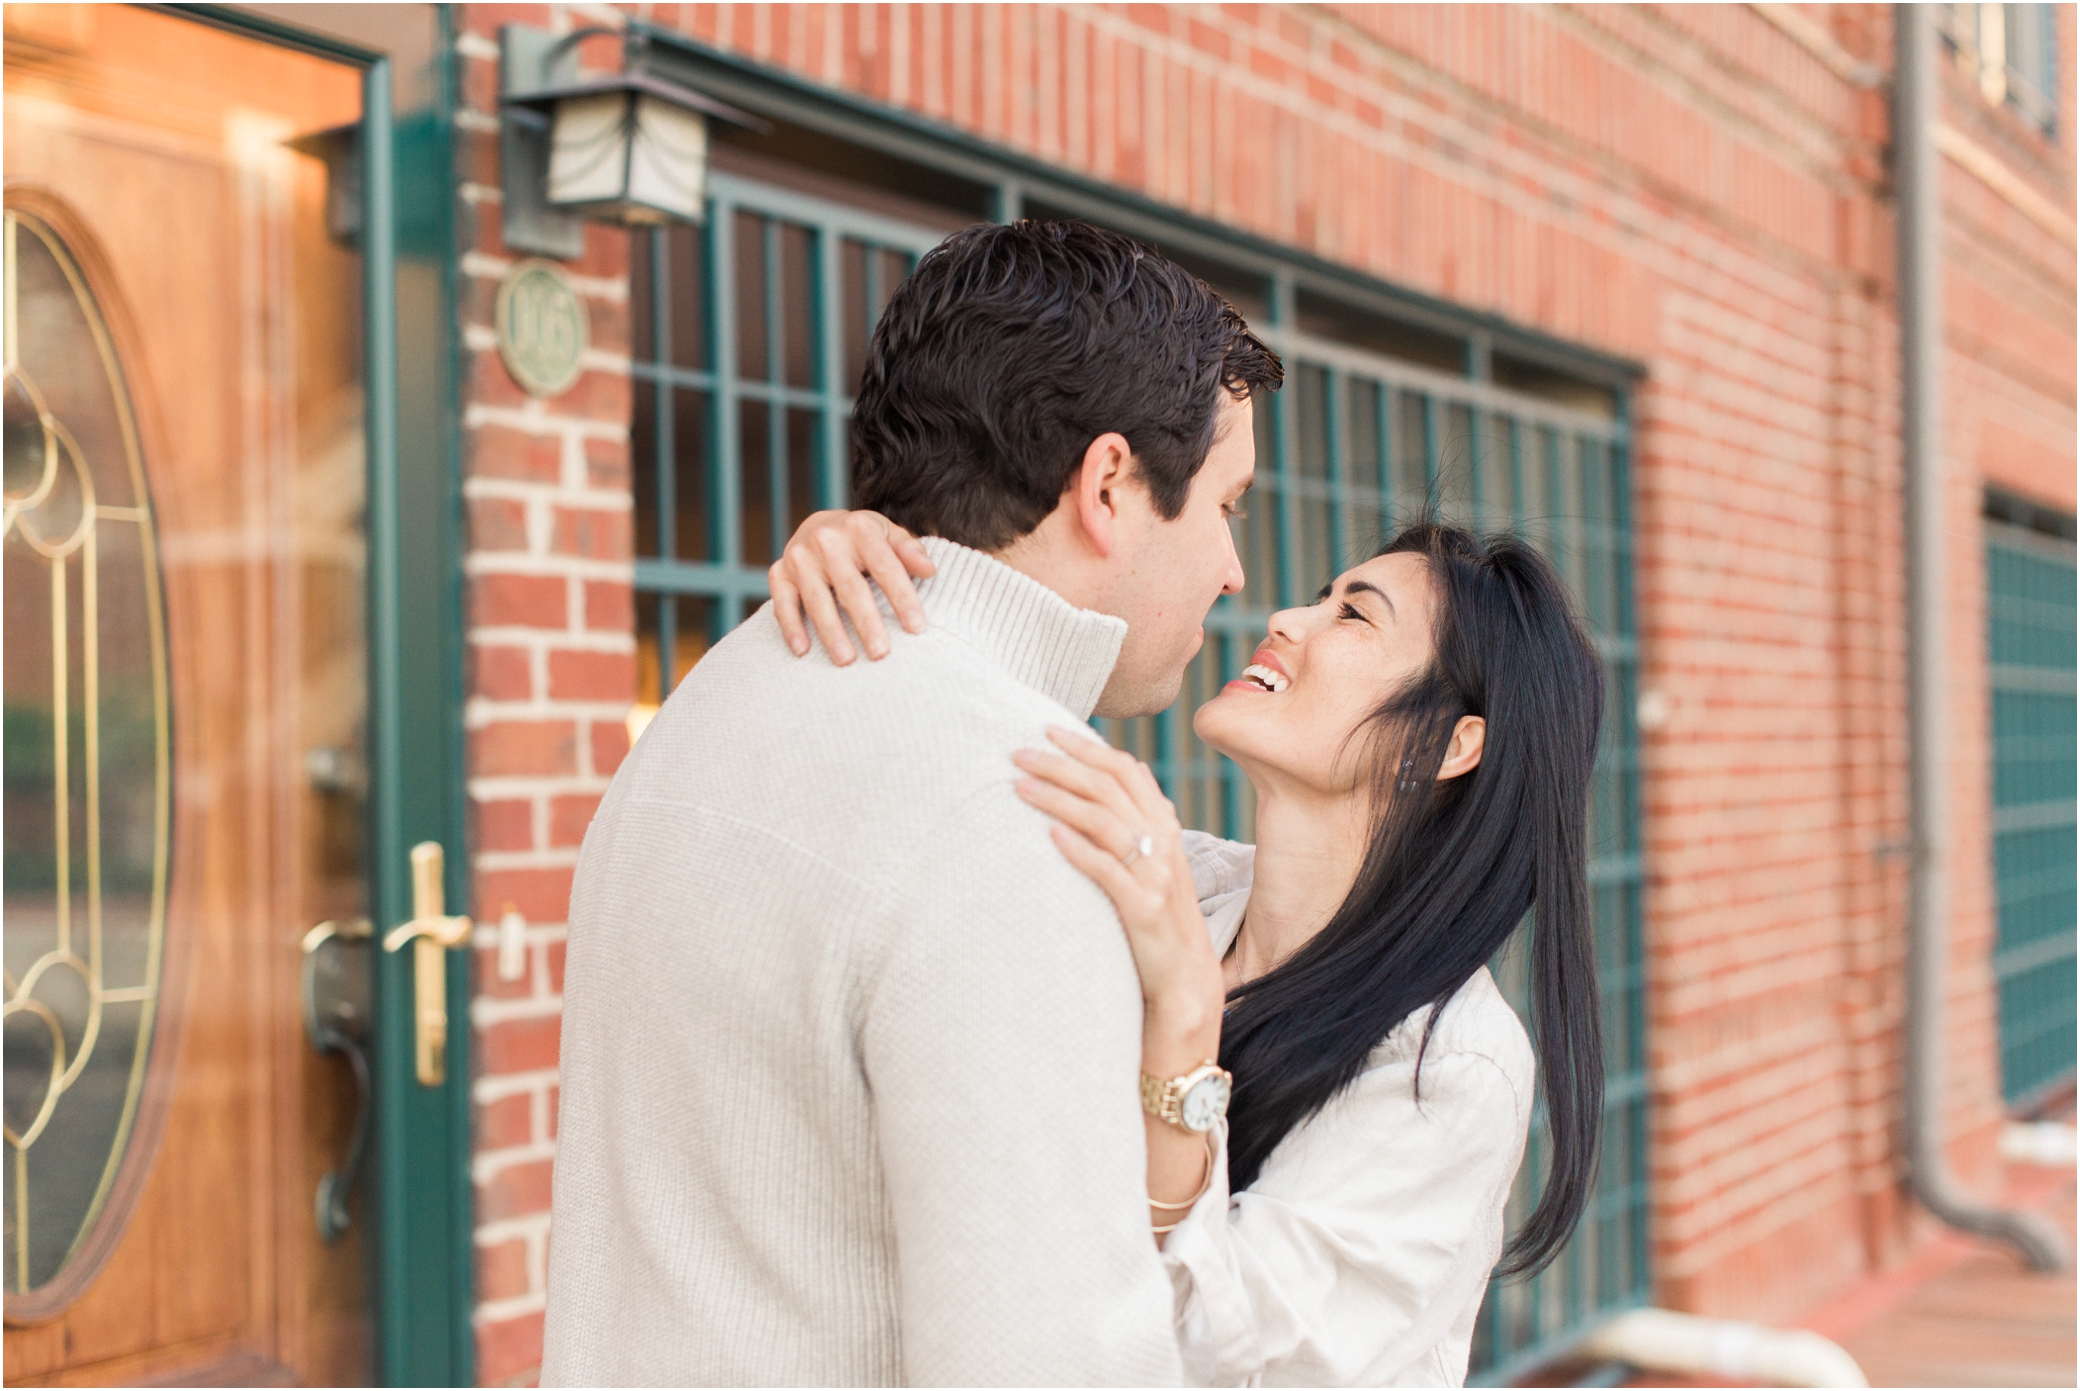 Engagement photos in Fells point